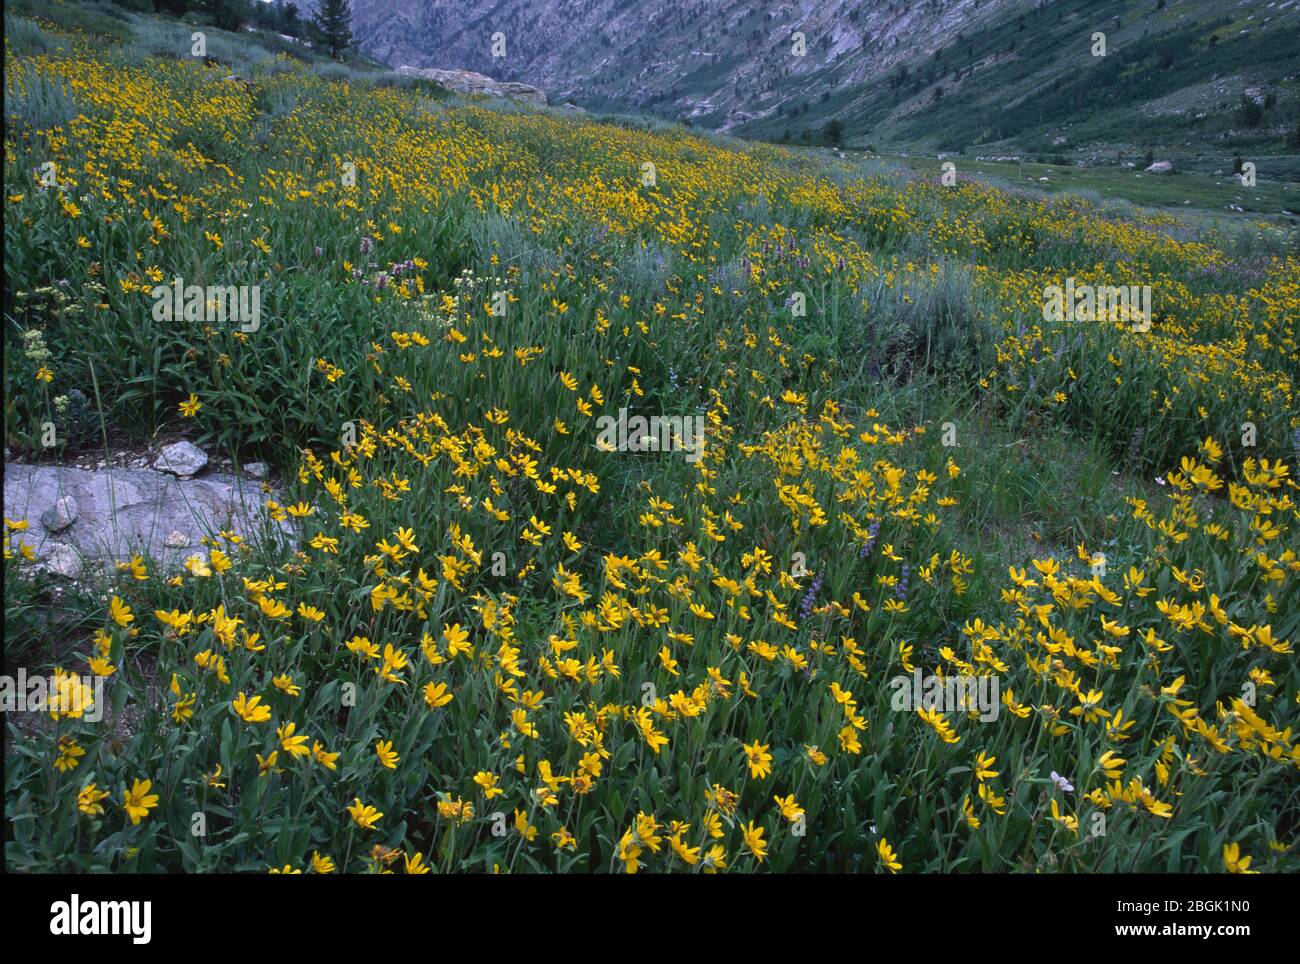 Lamoille Canyon flower field, Lamoille Canyon National Scenic Byway, Humboldt-Toiyabe National Forest, Nevada Stock Photo